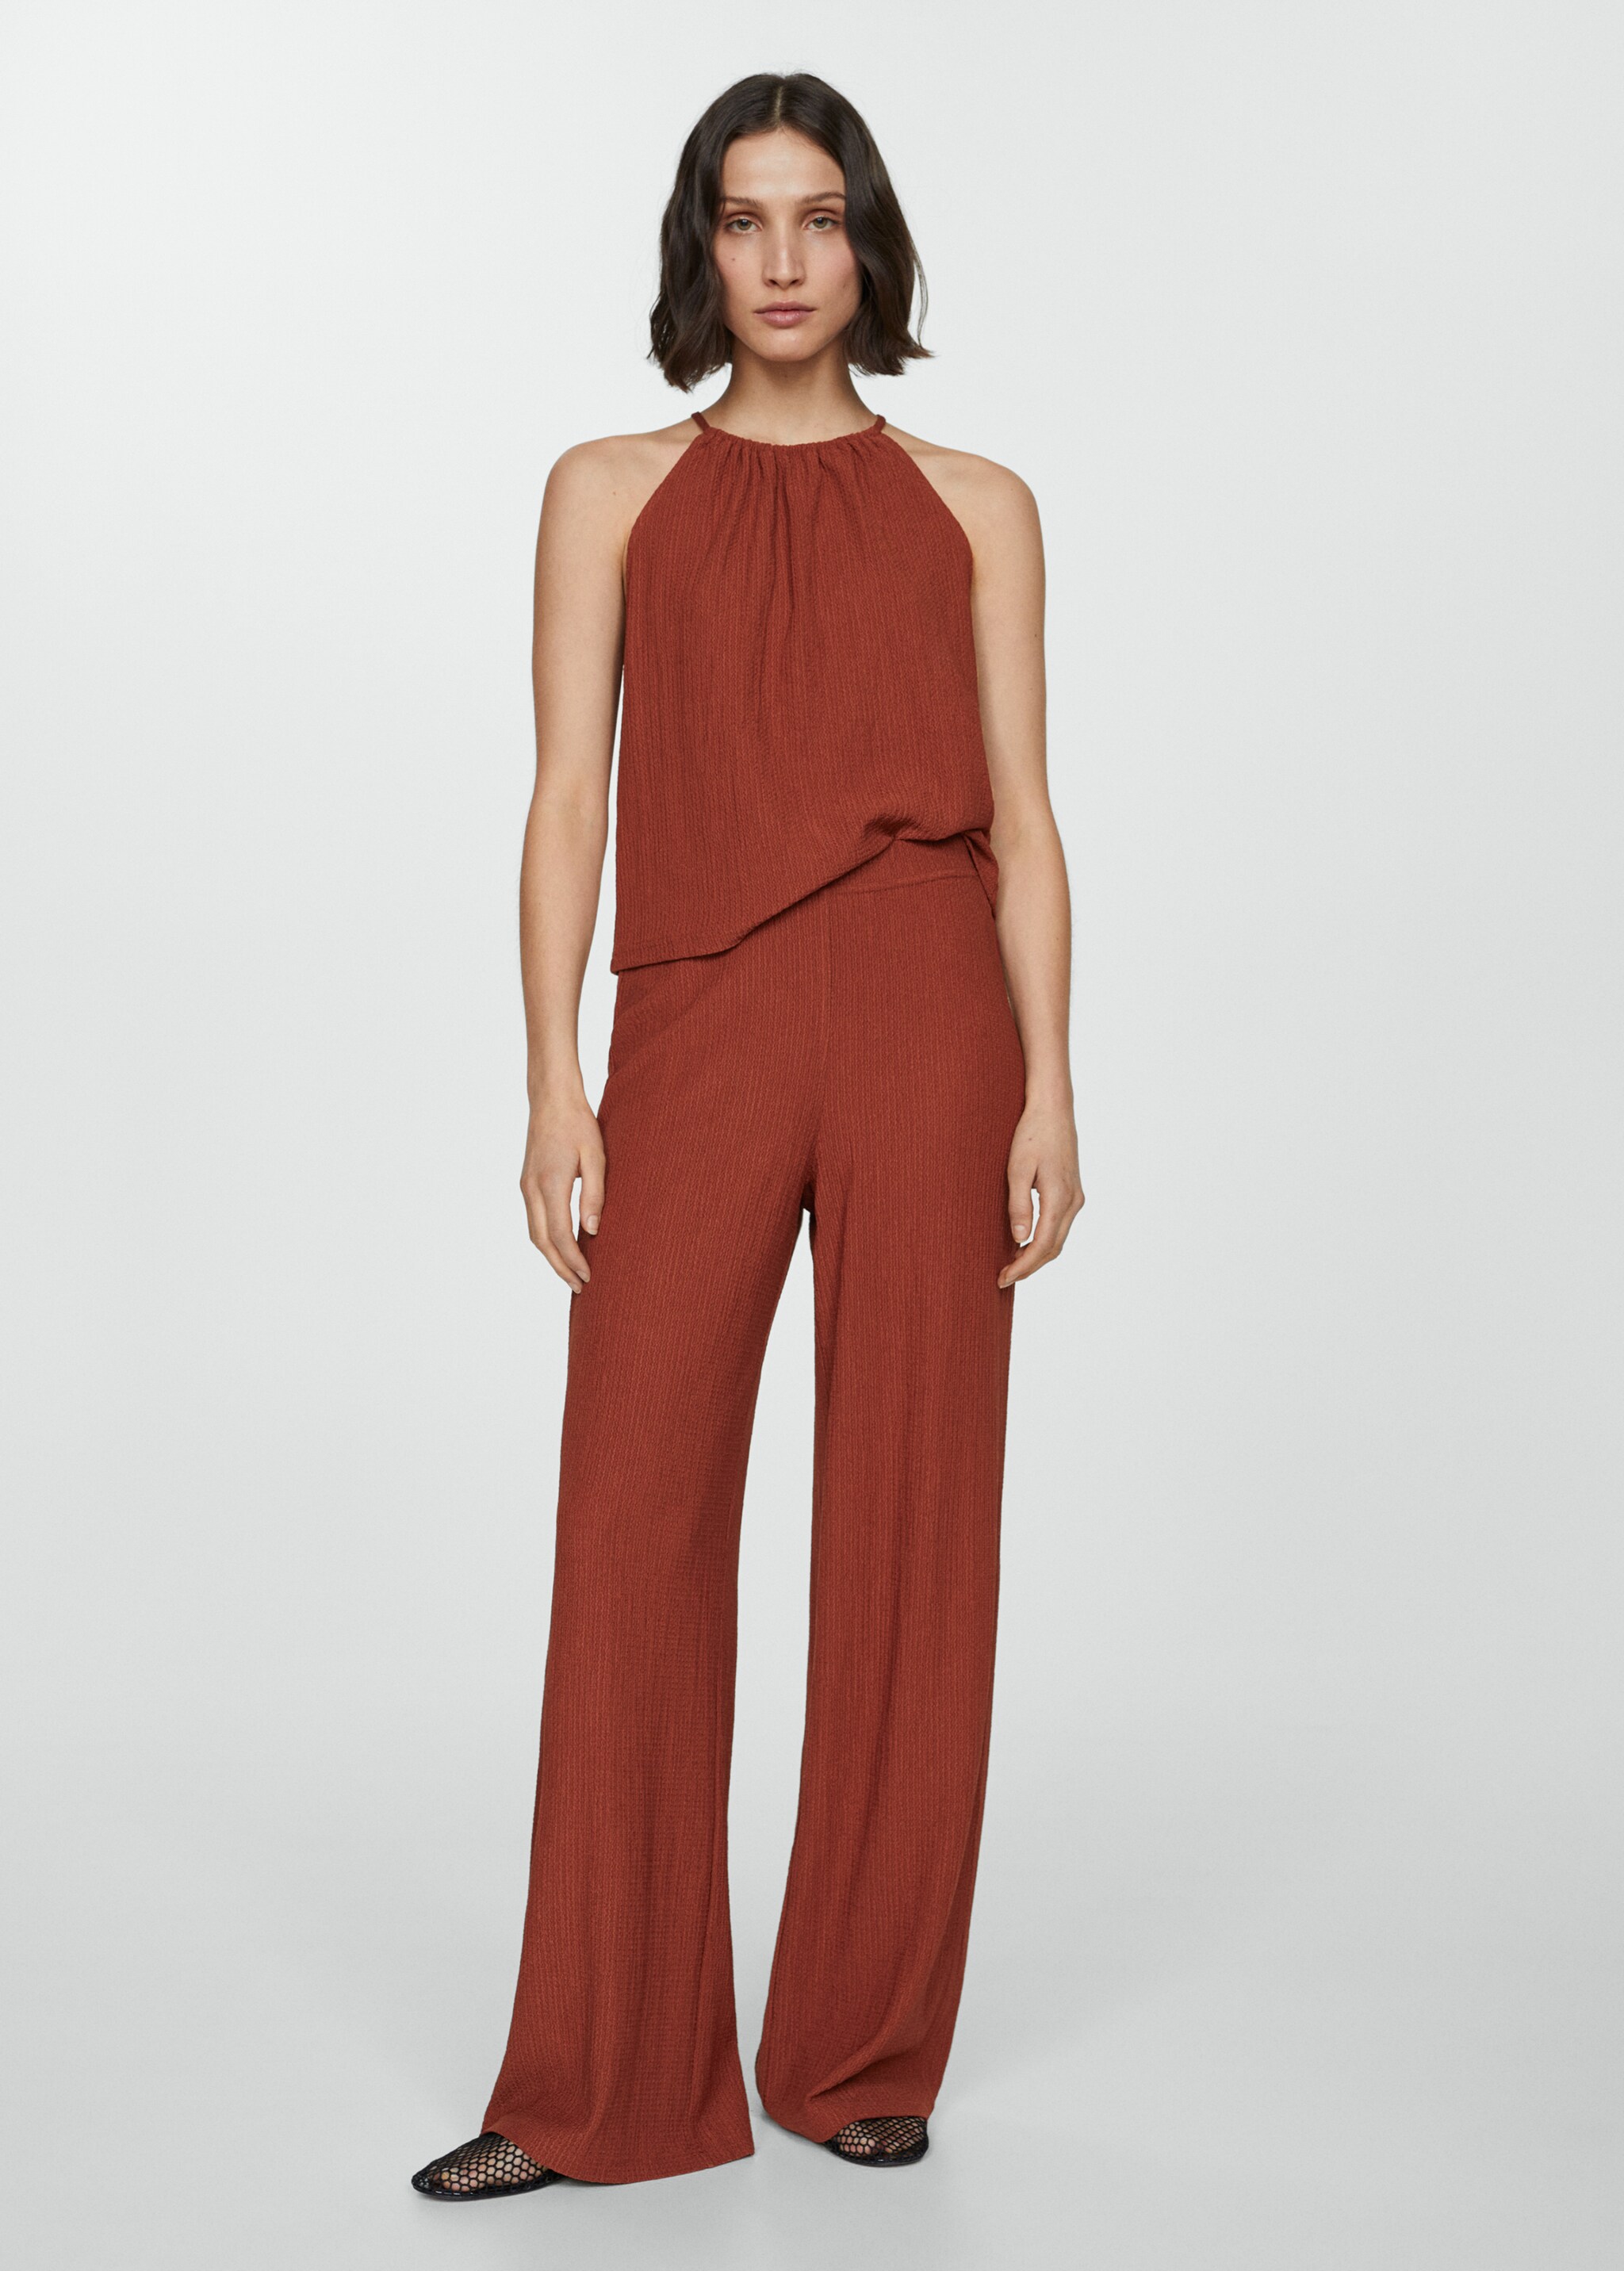 Textured wideleg trousers - General plane